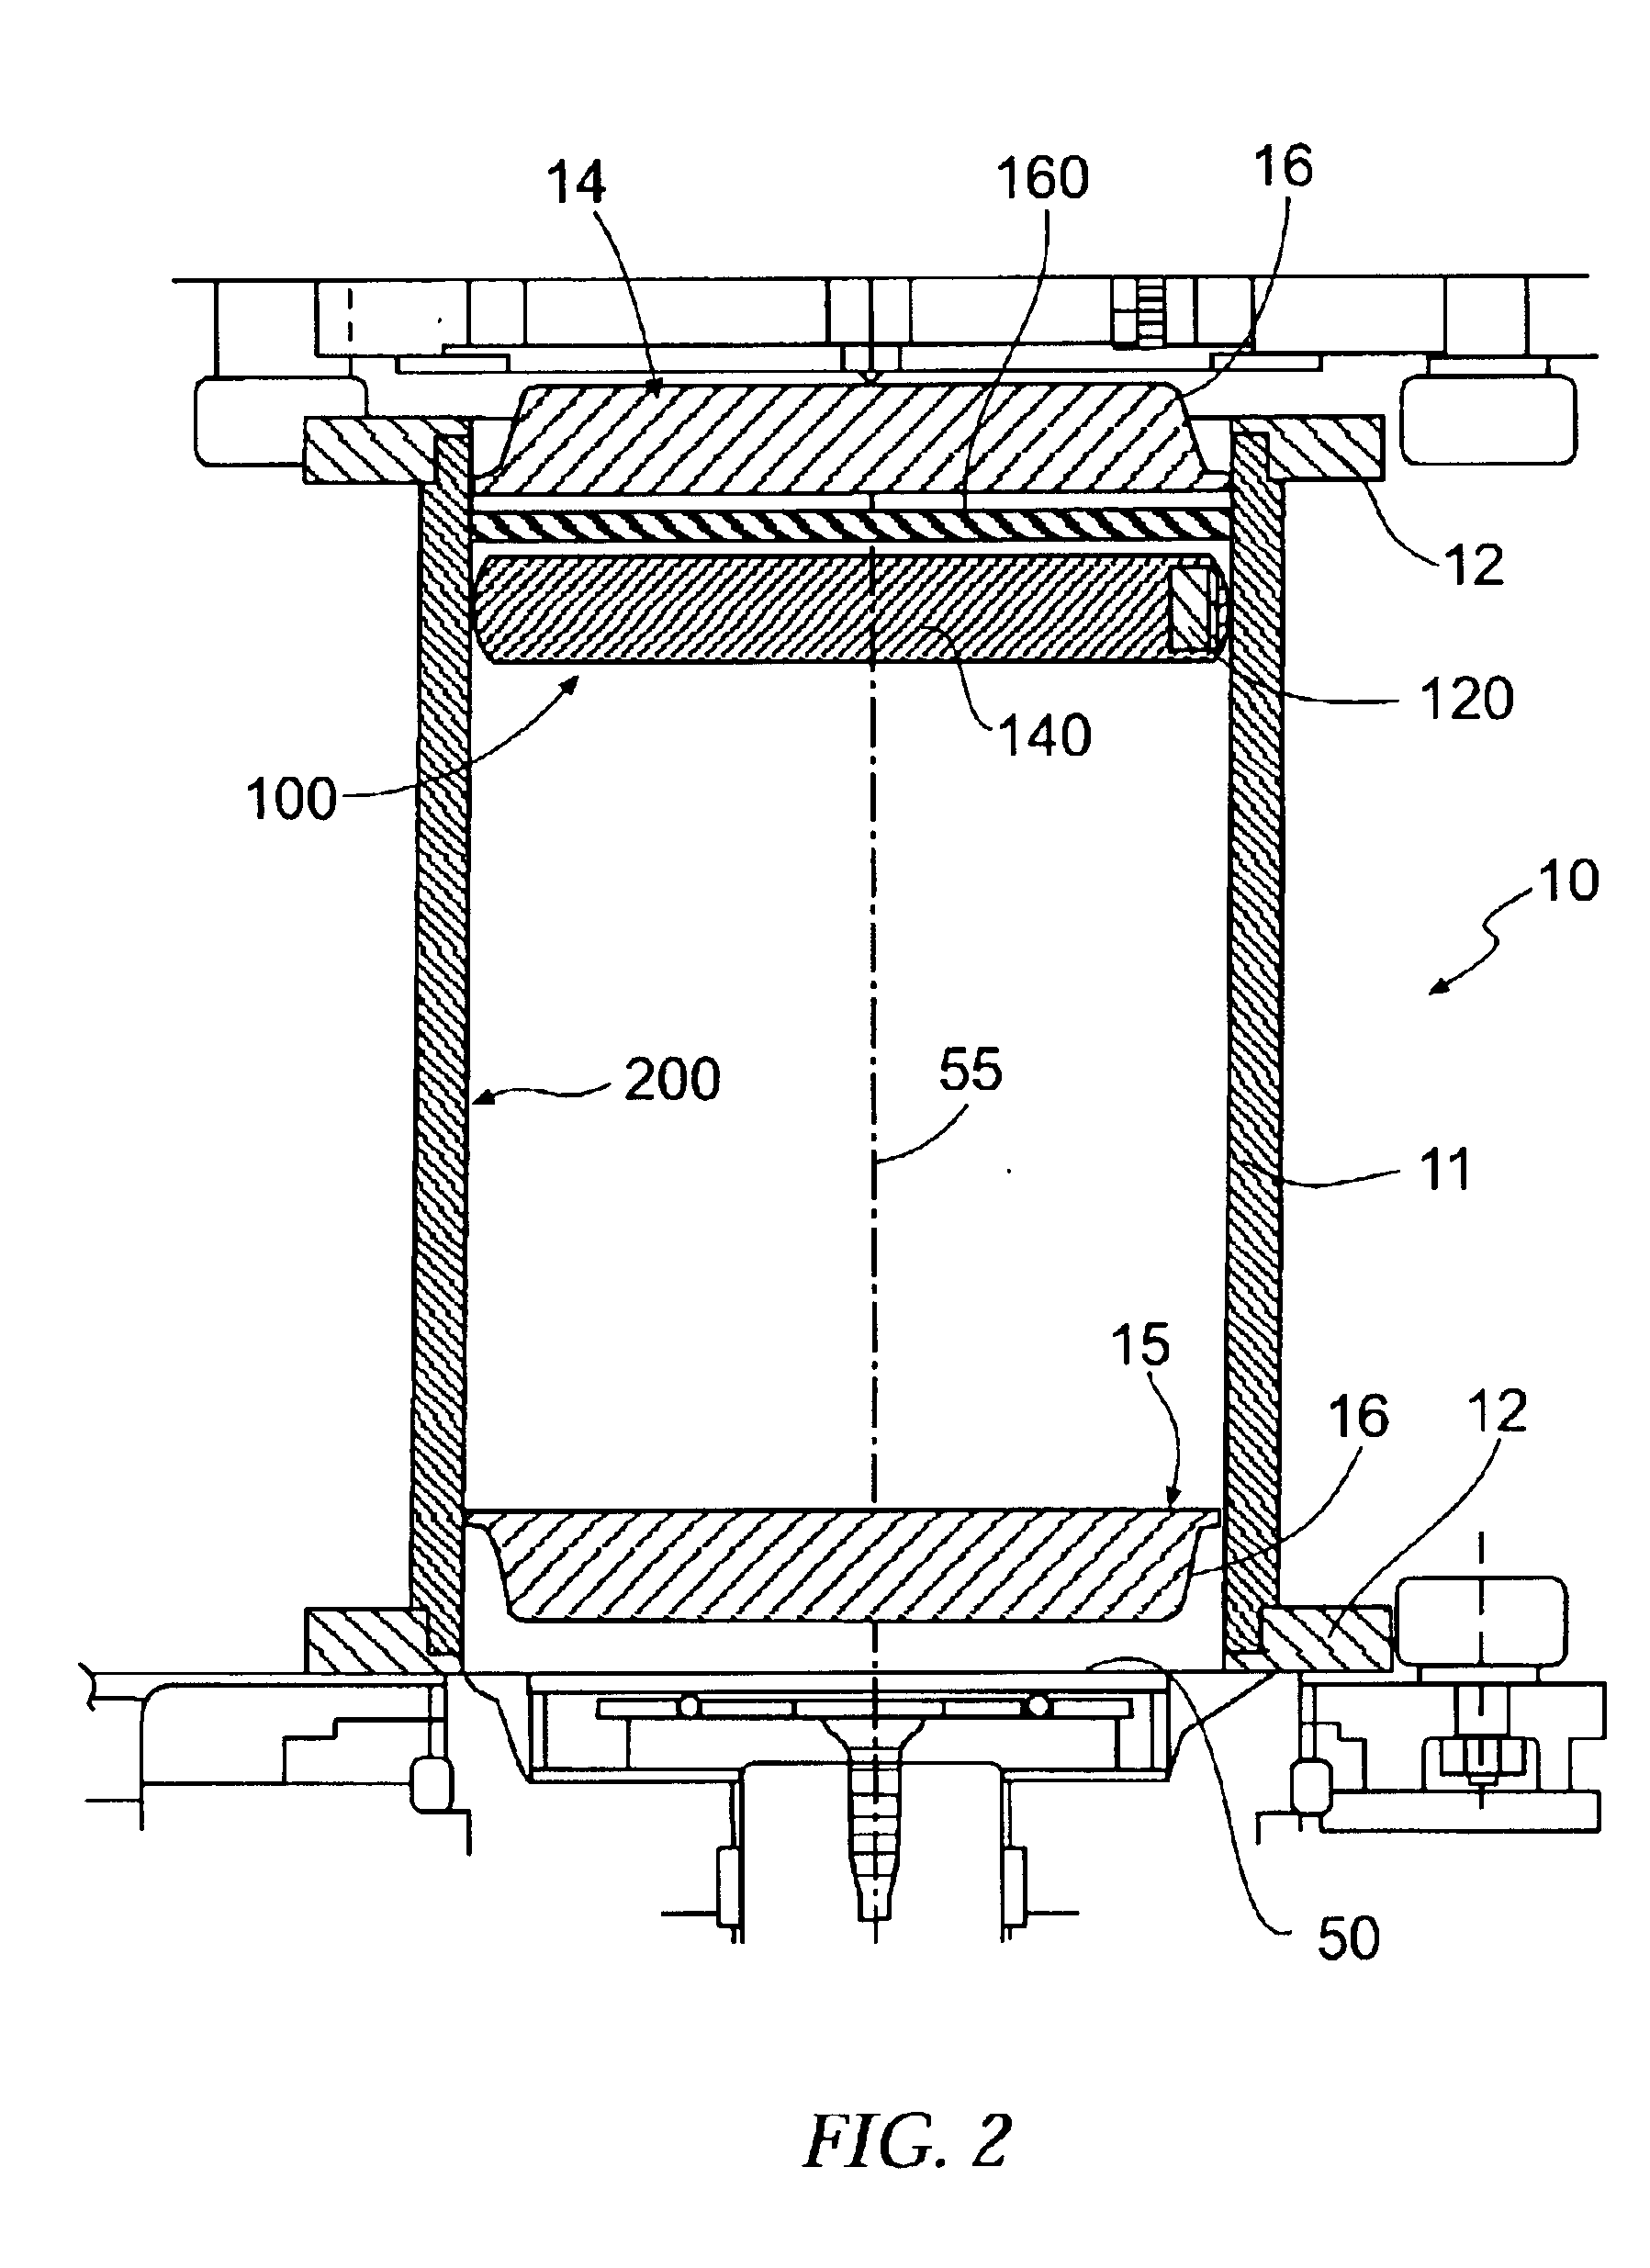 Method and apparatus for determining the angle of gyration and/or the pressure in a gyratory compactor